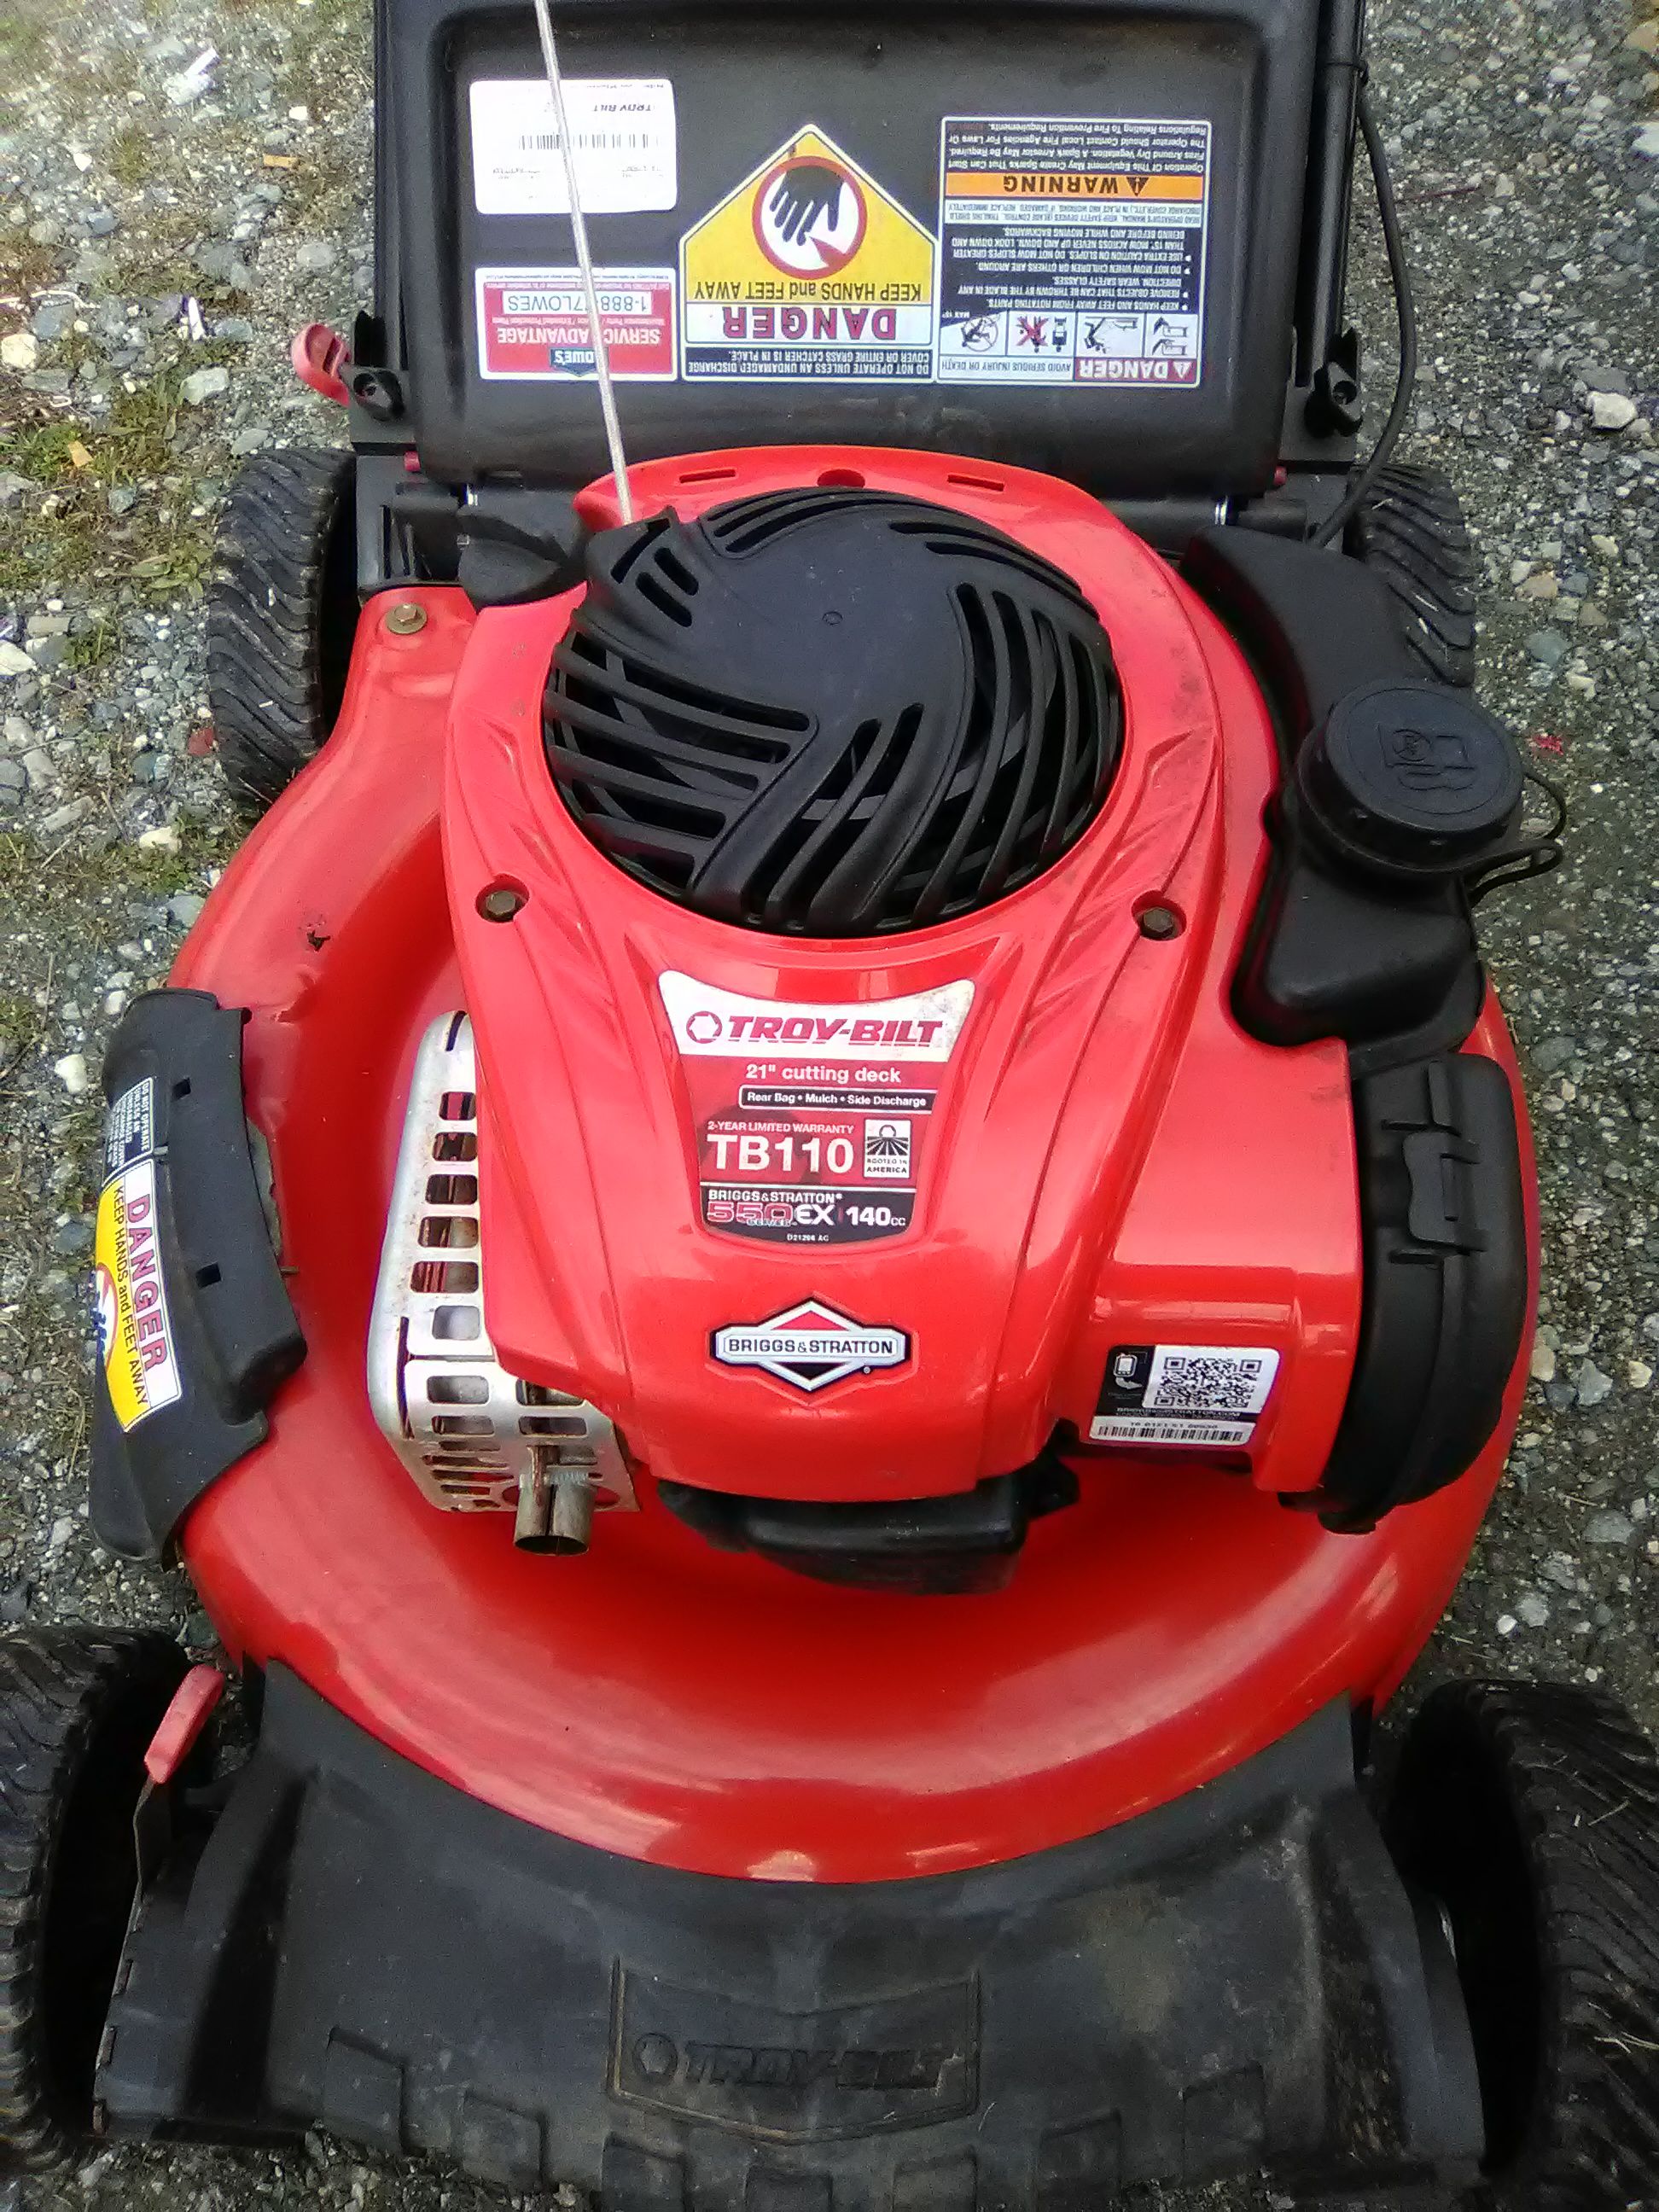 Troy-Bilt lawn mower with the bag